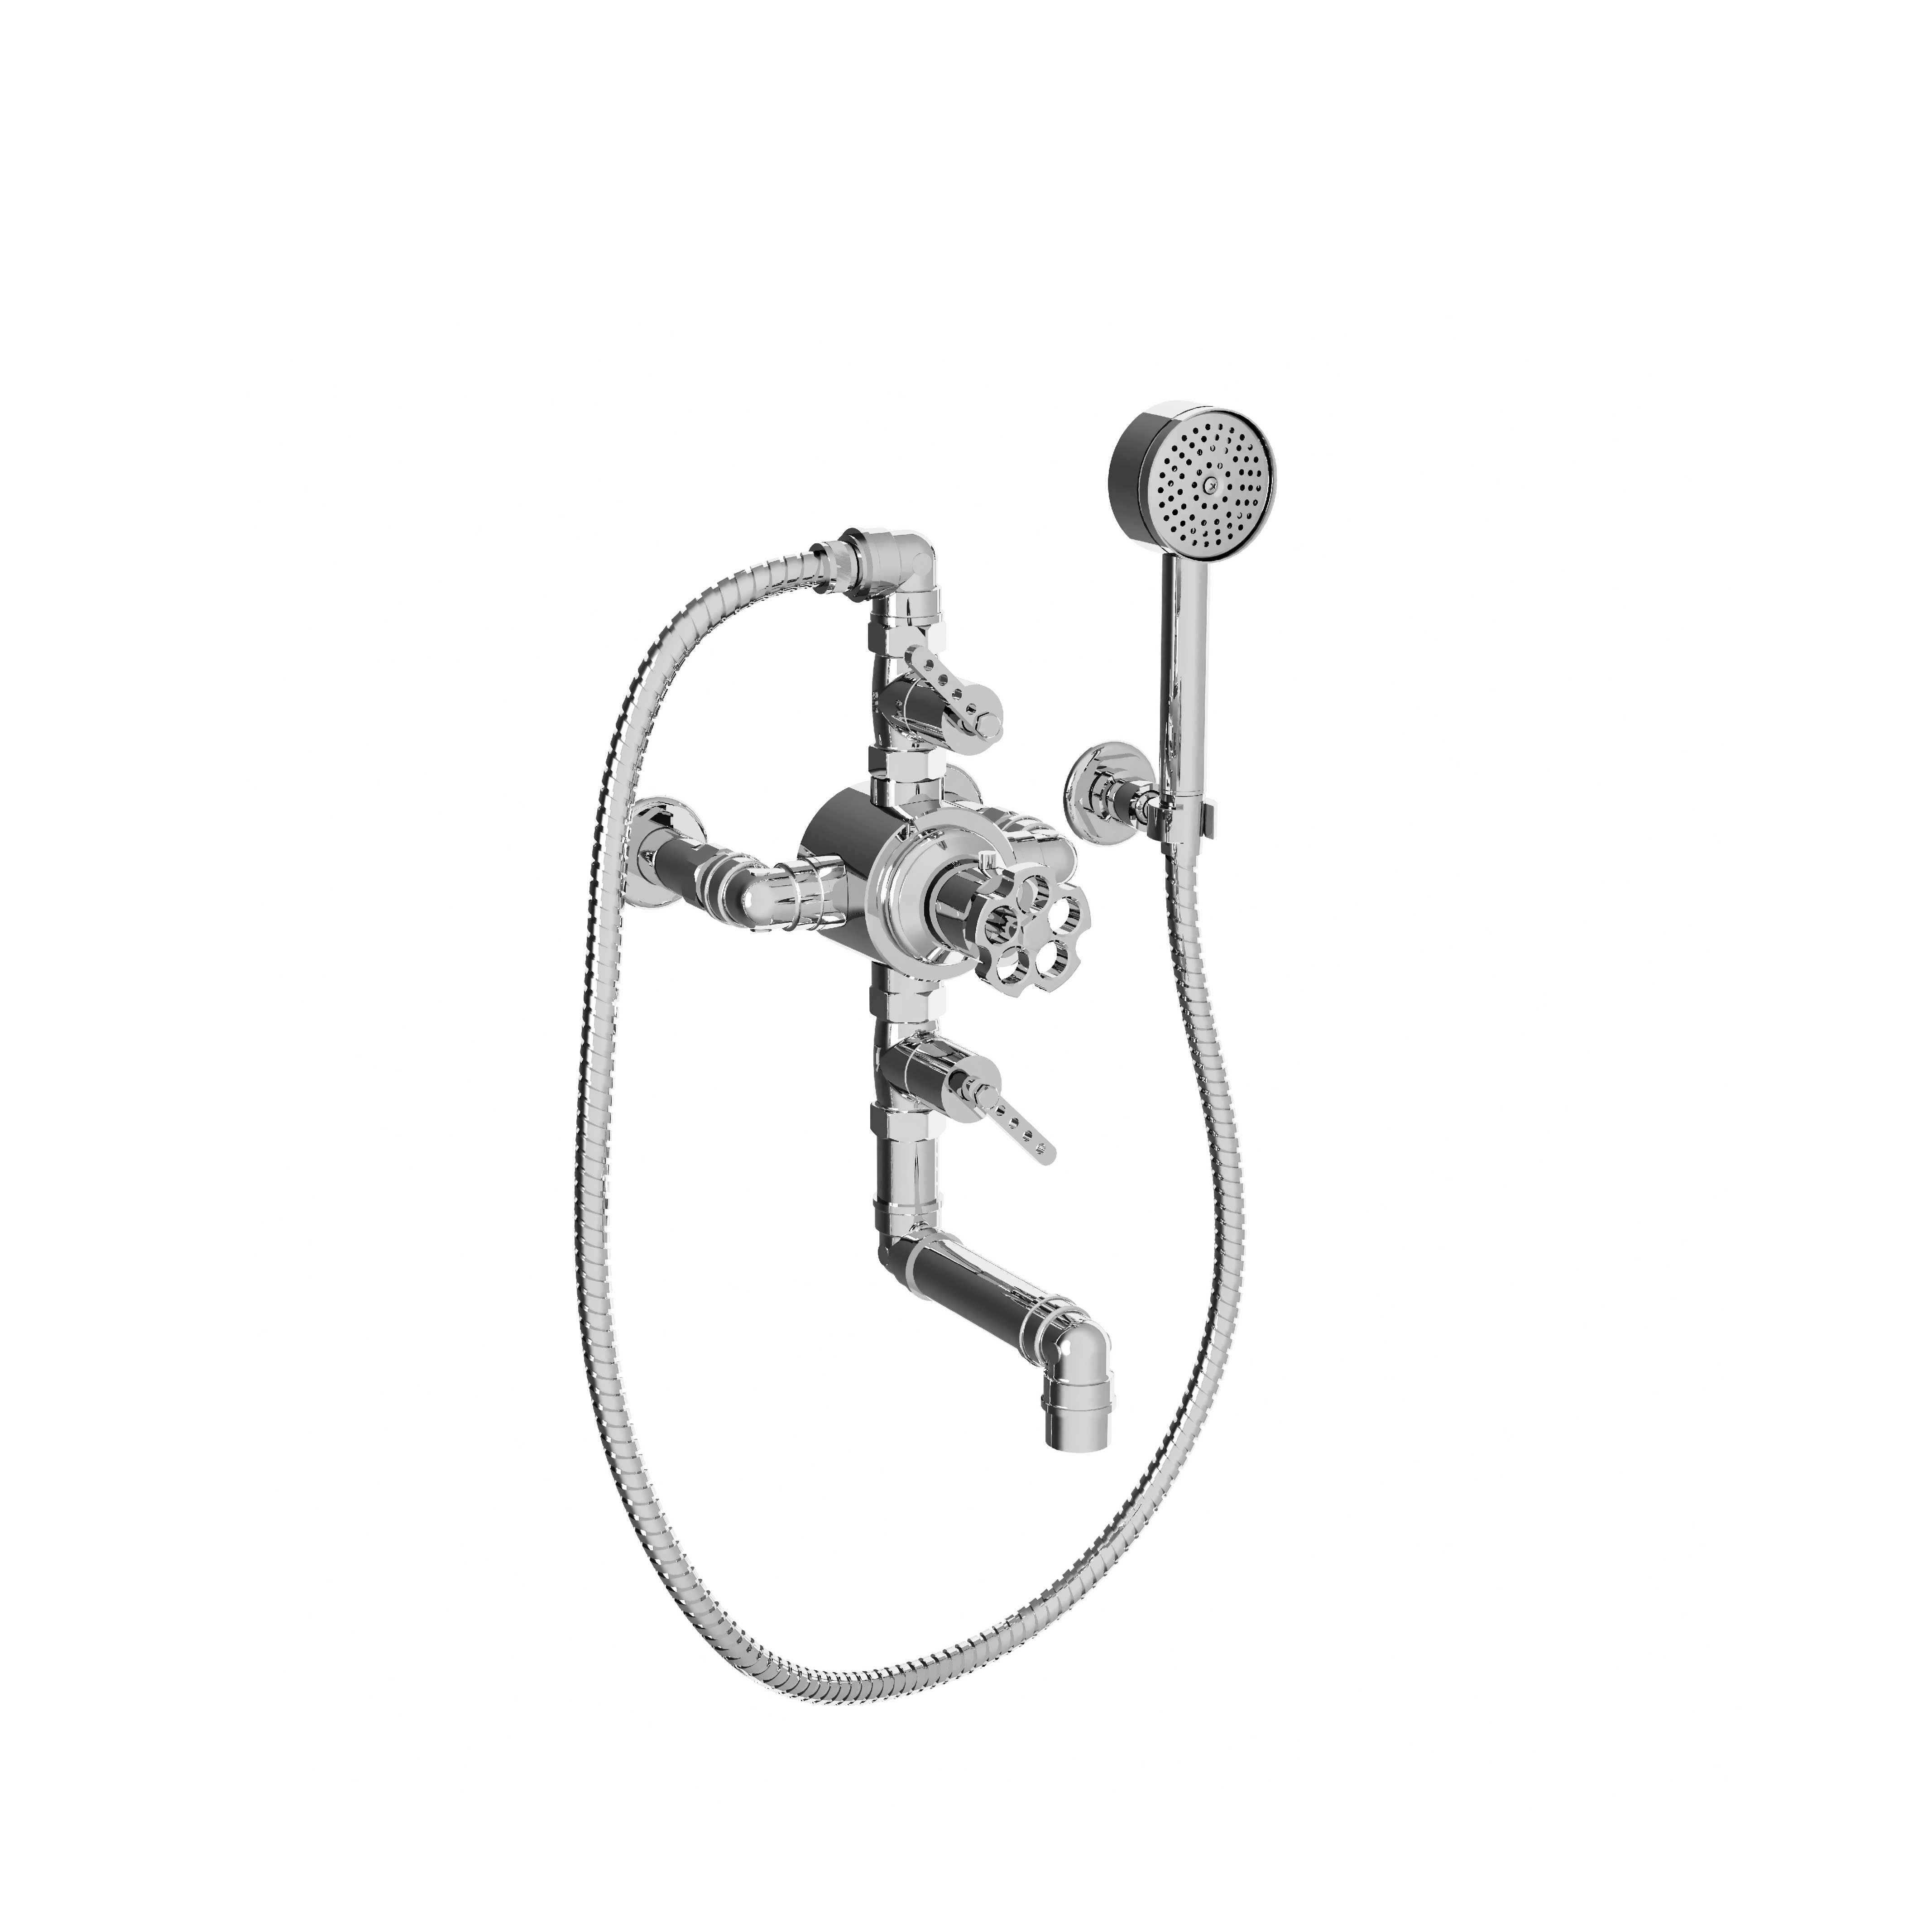 M81-3201T Wall mounted thermo. bath and shower mixer